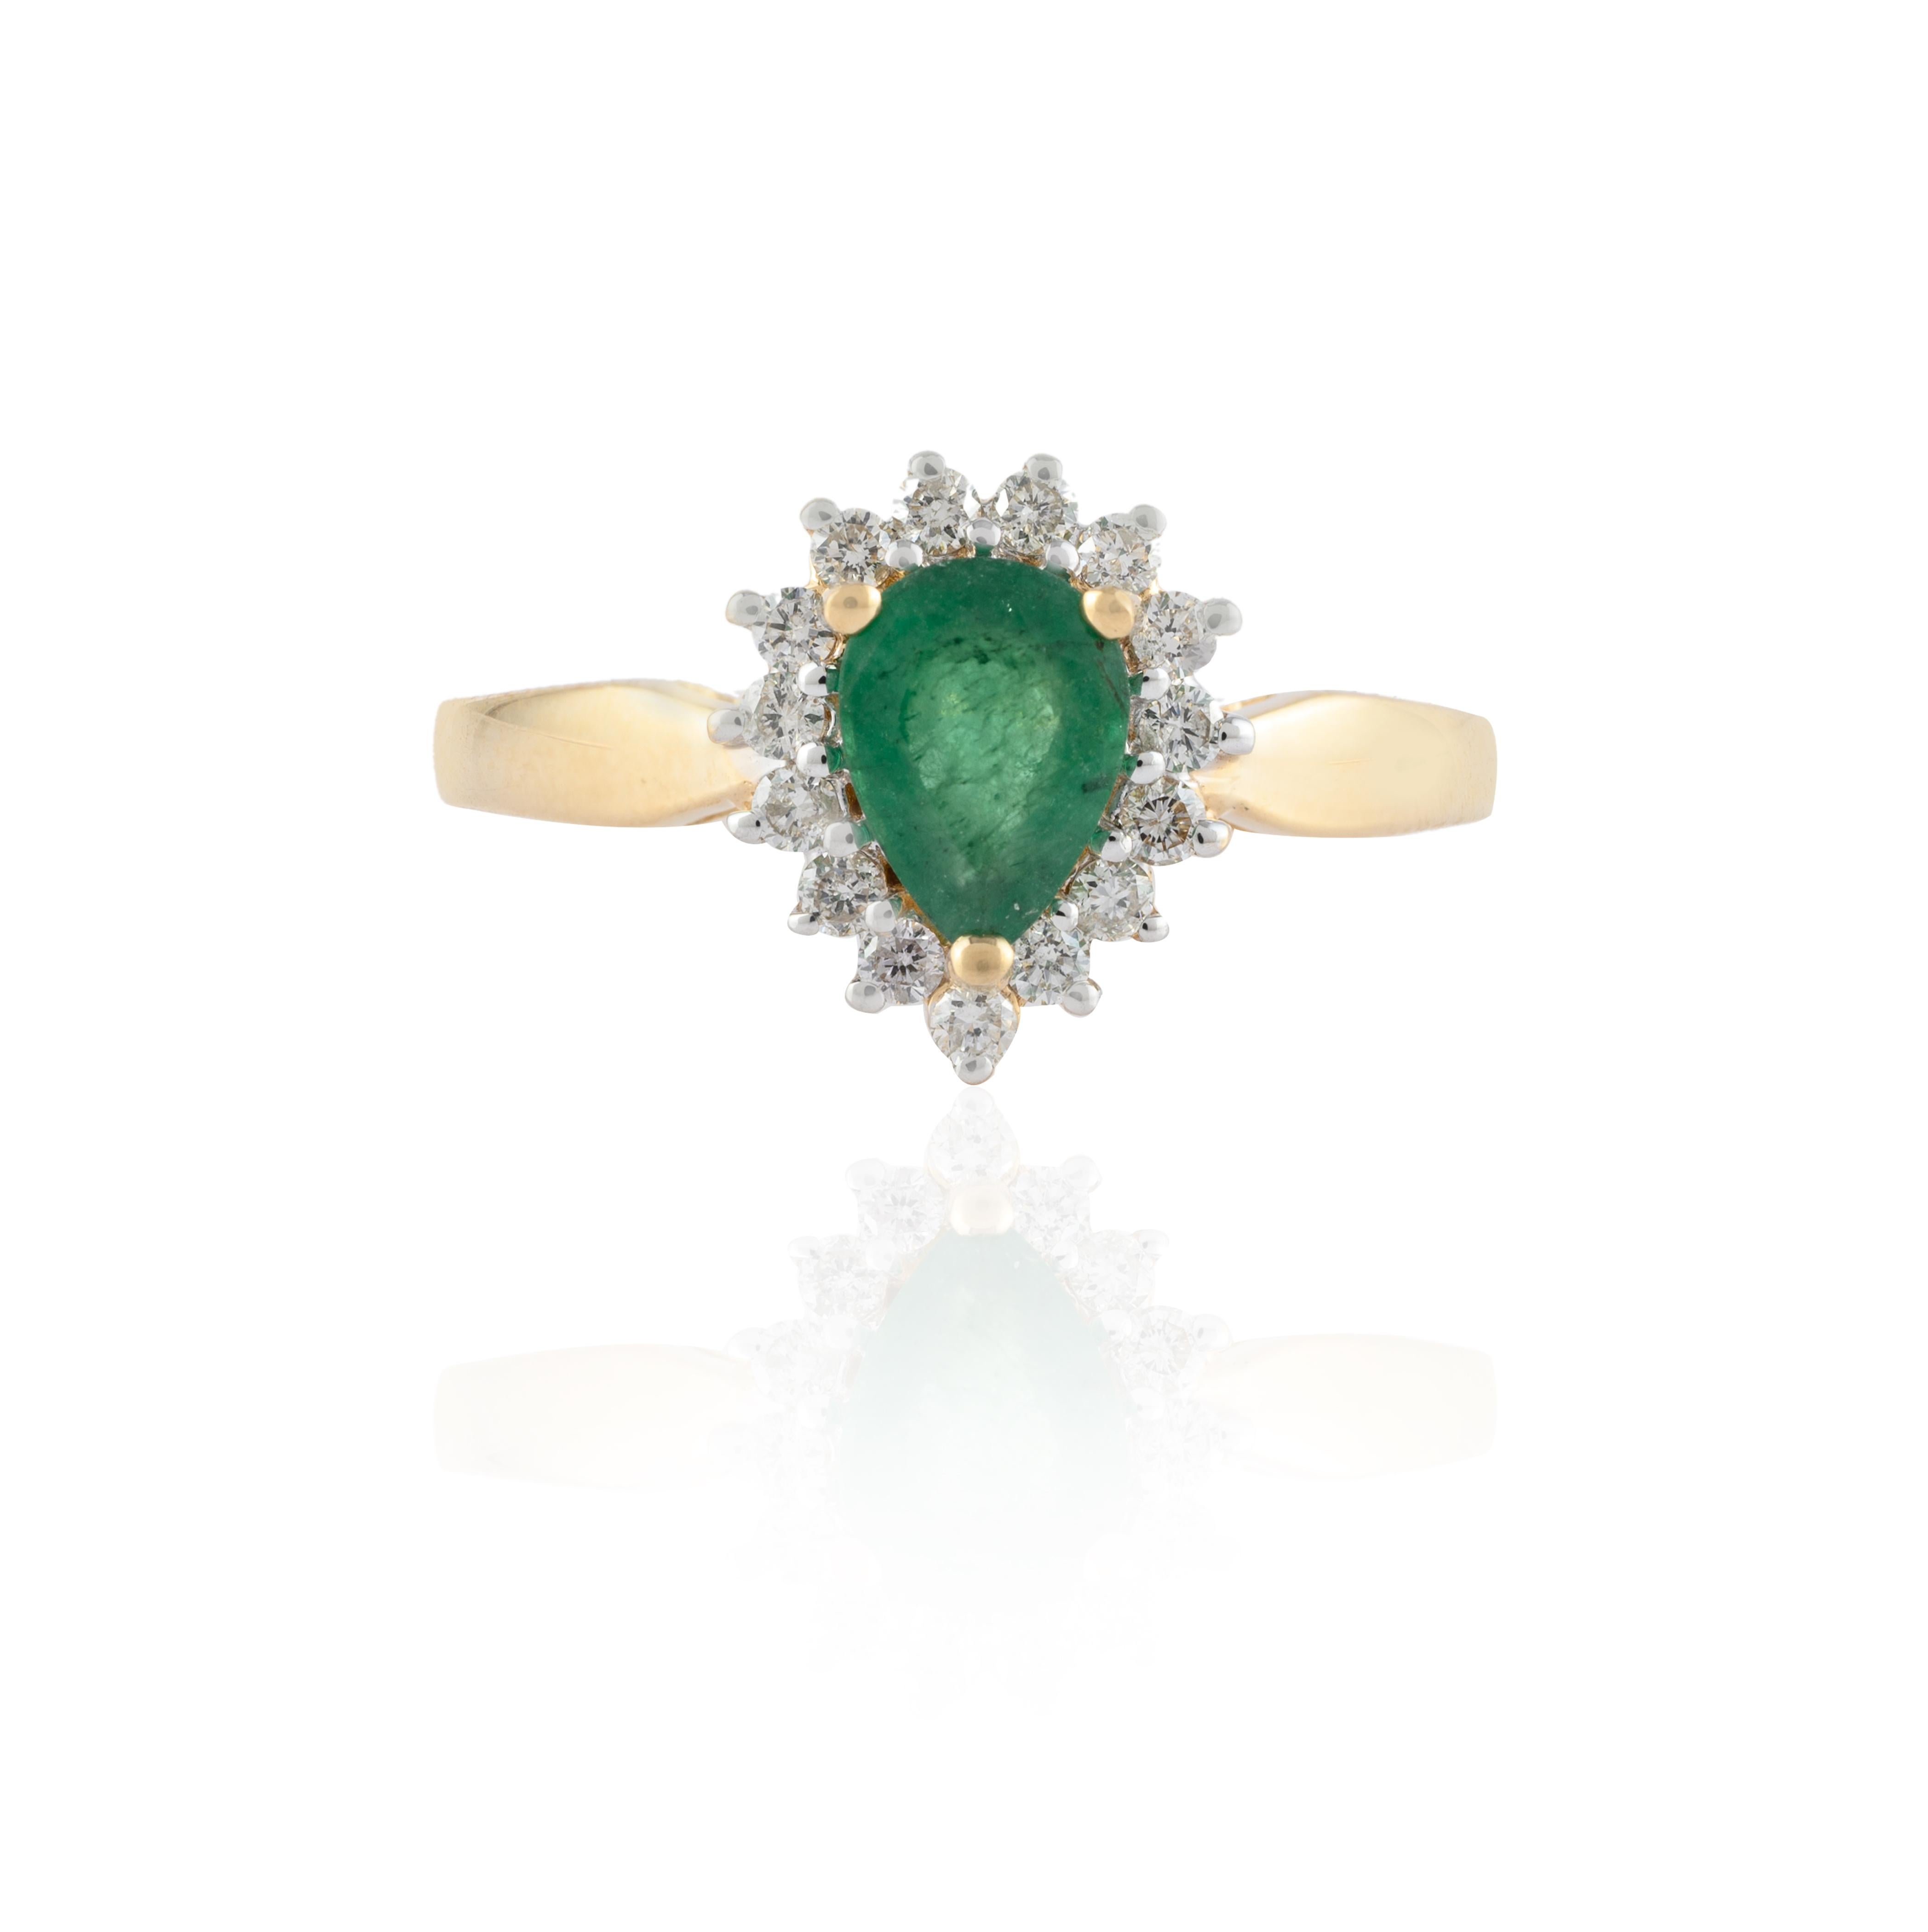 For Sale:  Pear Cut Emerald and Halo Diamond Wedding Ring Crafted in 14k Solid Yellow Gold 2